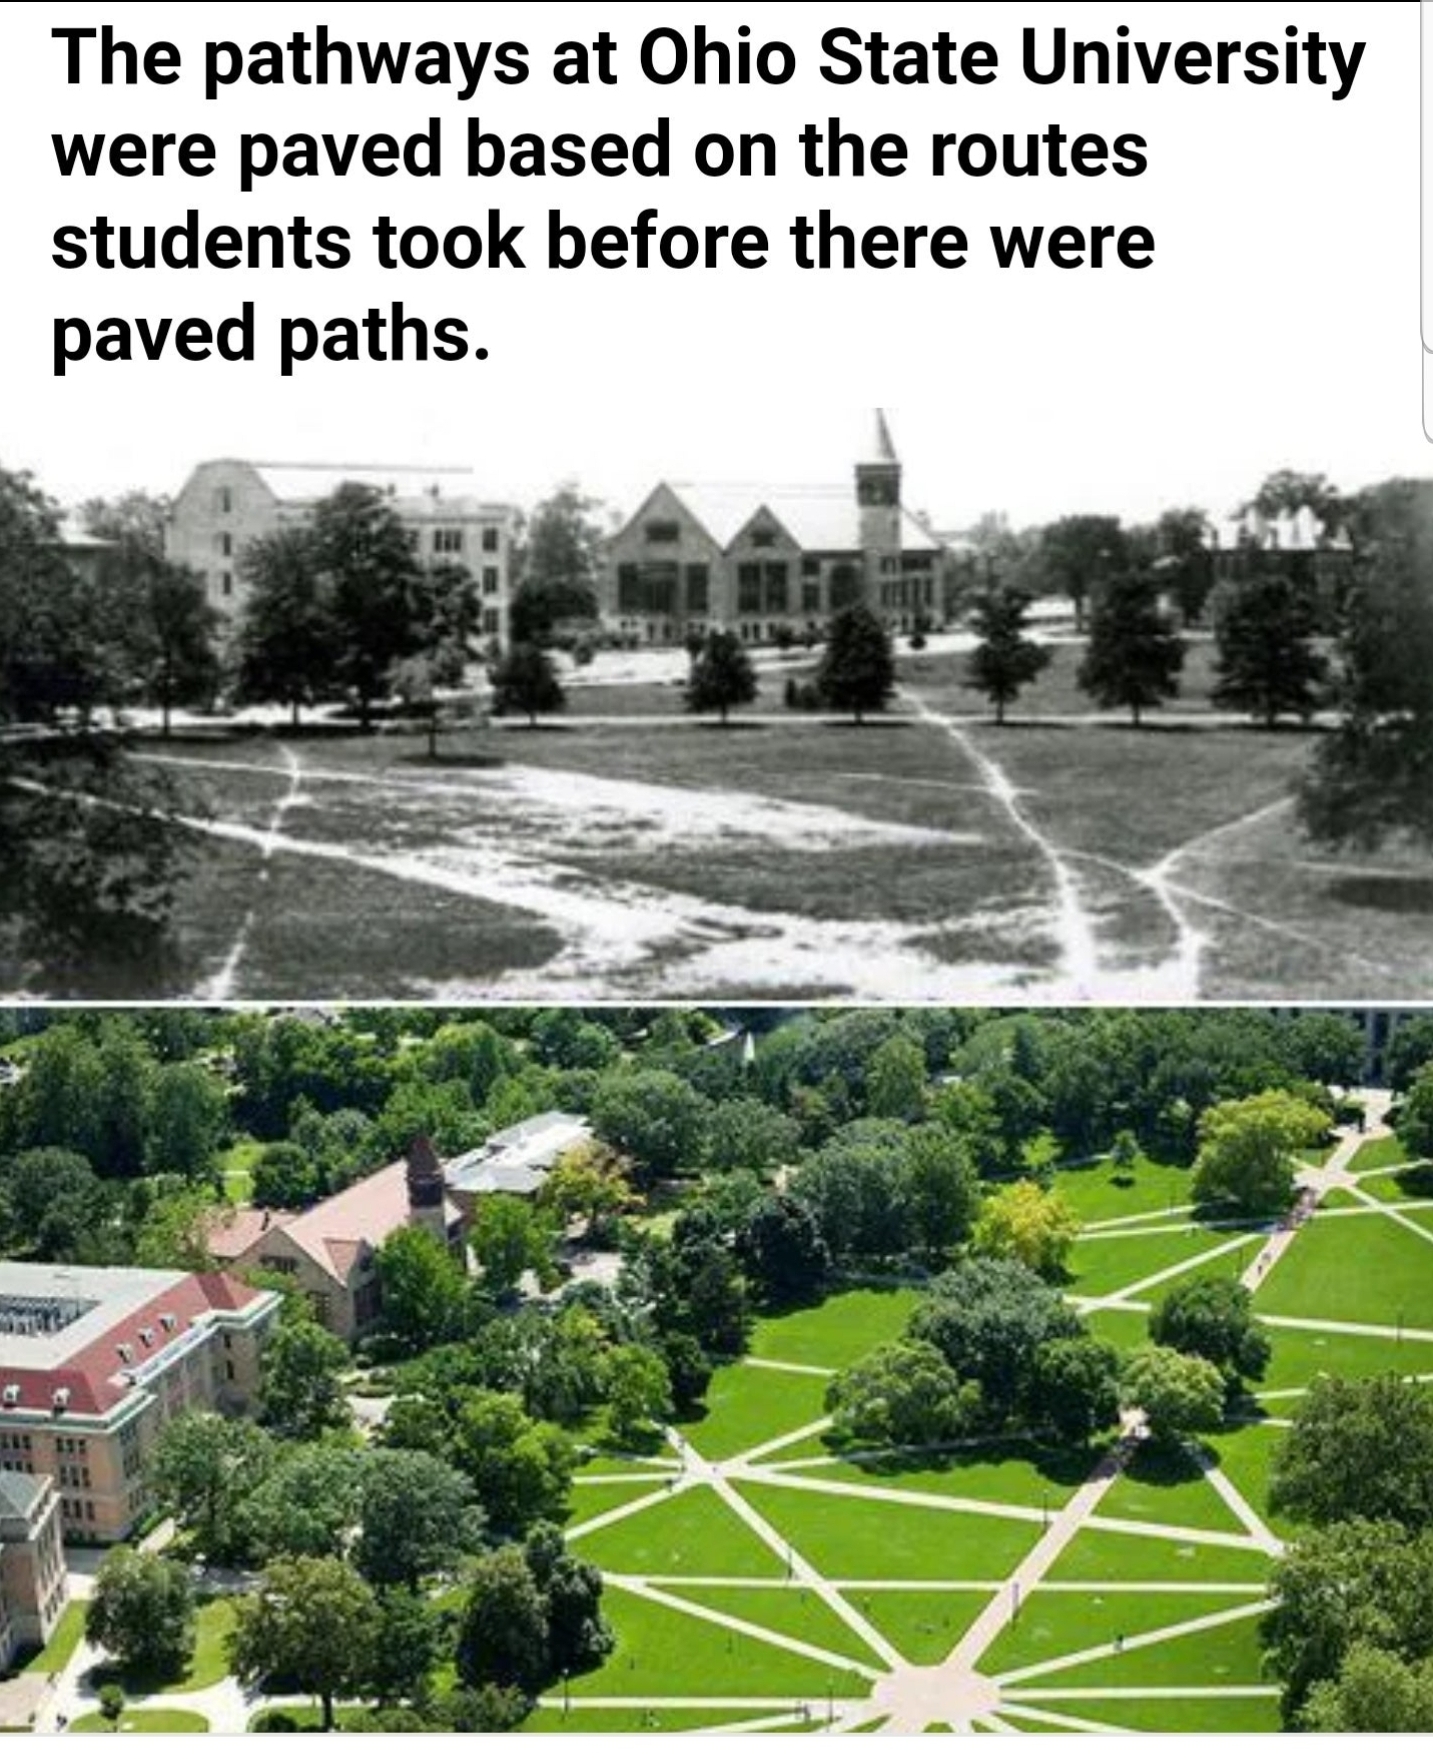 ohio state desire paths - The pathways at Ohio State University were paved based on the routes students took before there were paved paths. 10